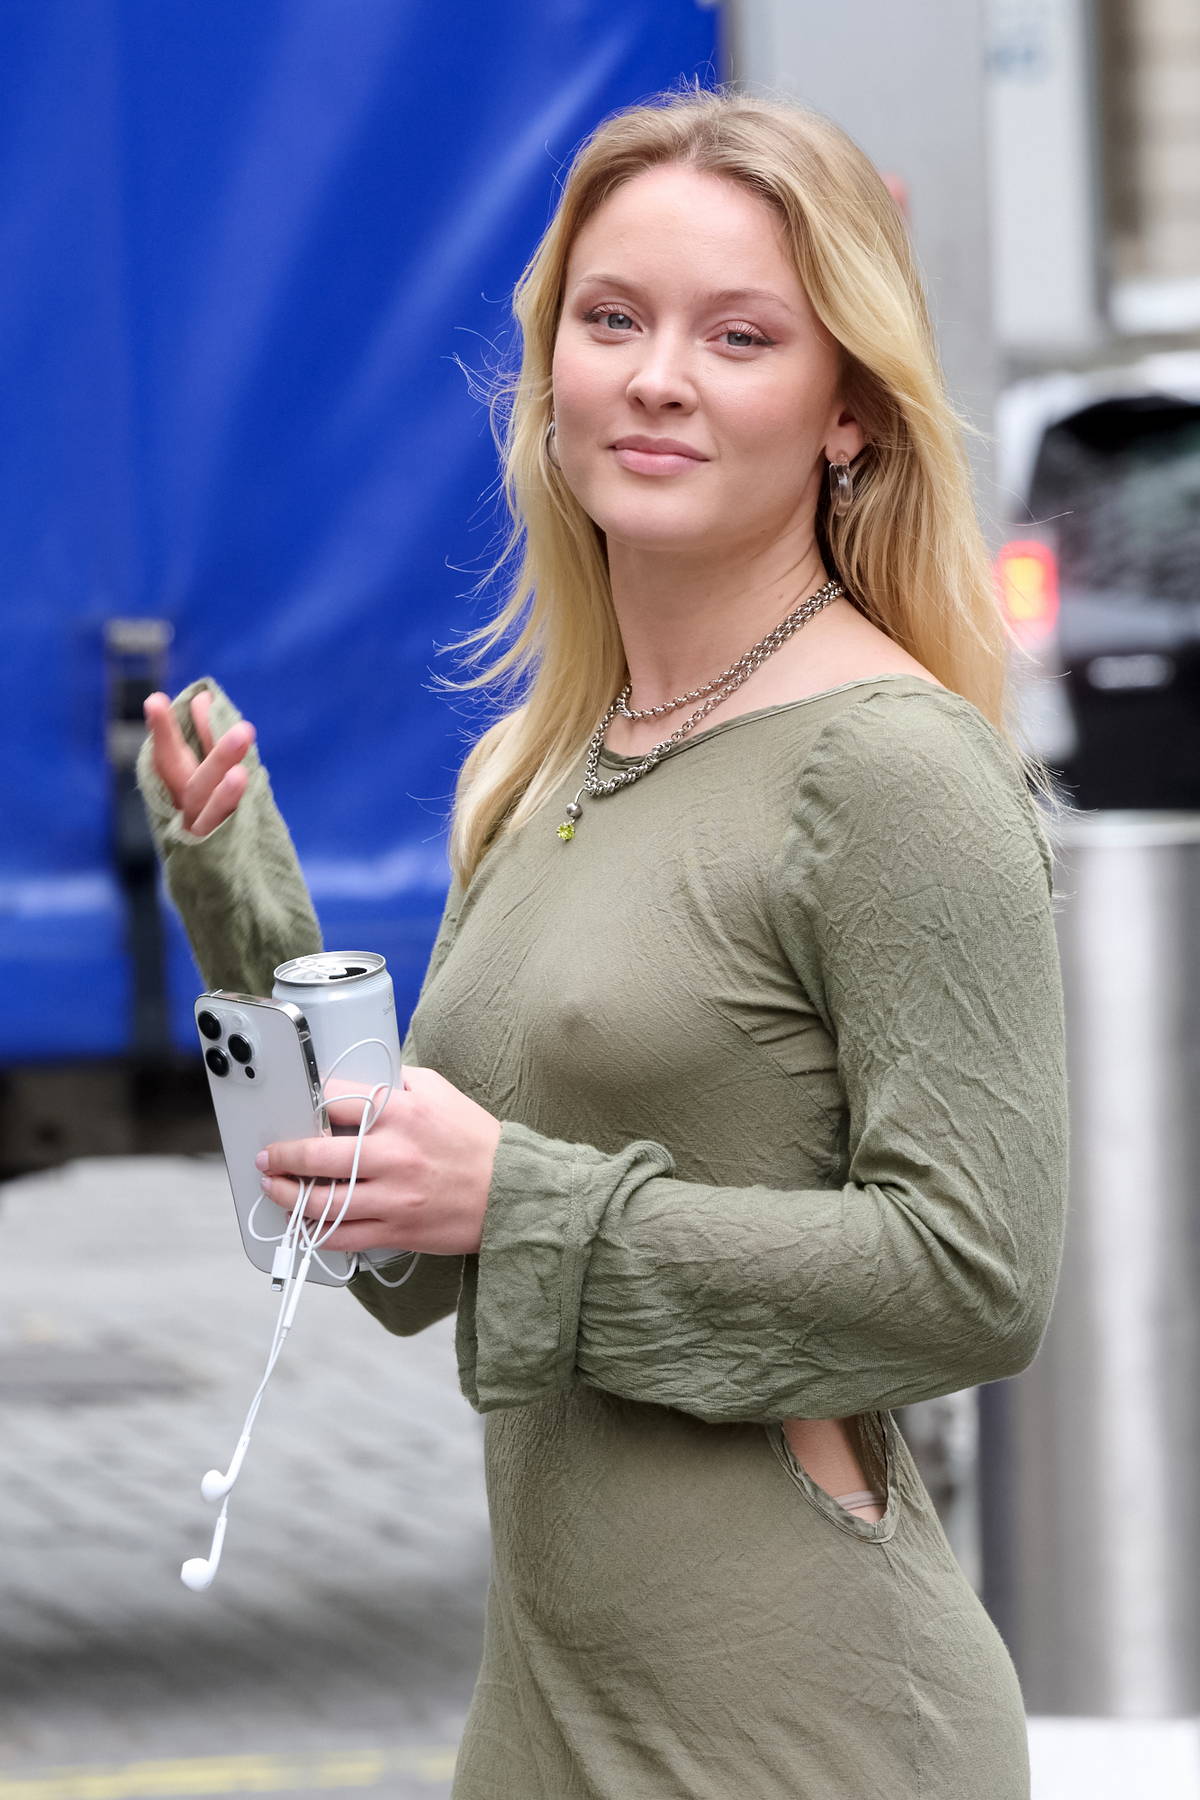 Zara Larsson looks amazing in an olive green dress while seen